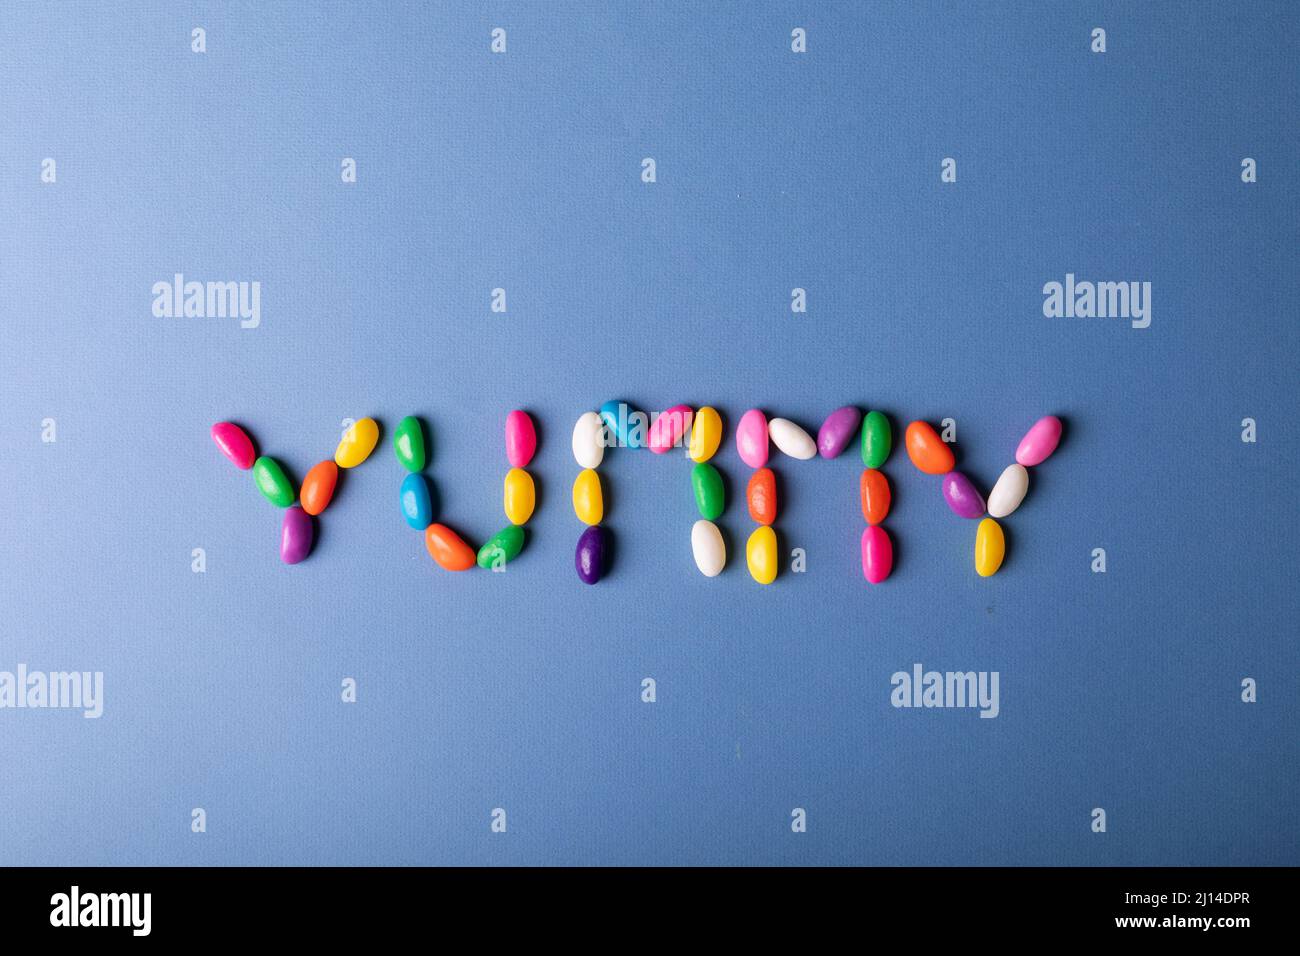 Overhead view of multi colored candies arranged as yummy word on blue background with copy space Stock Photo